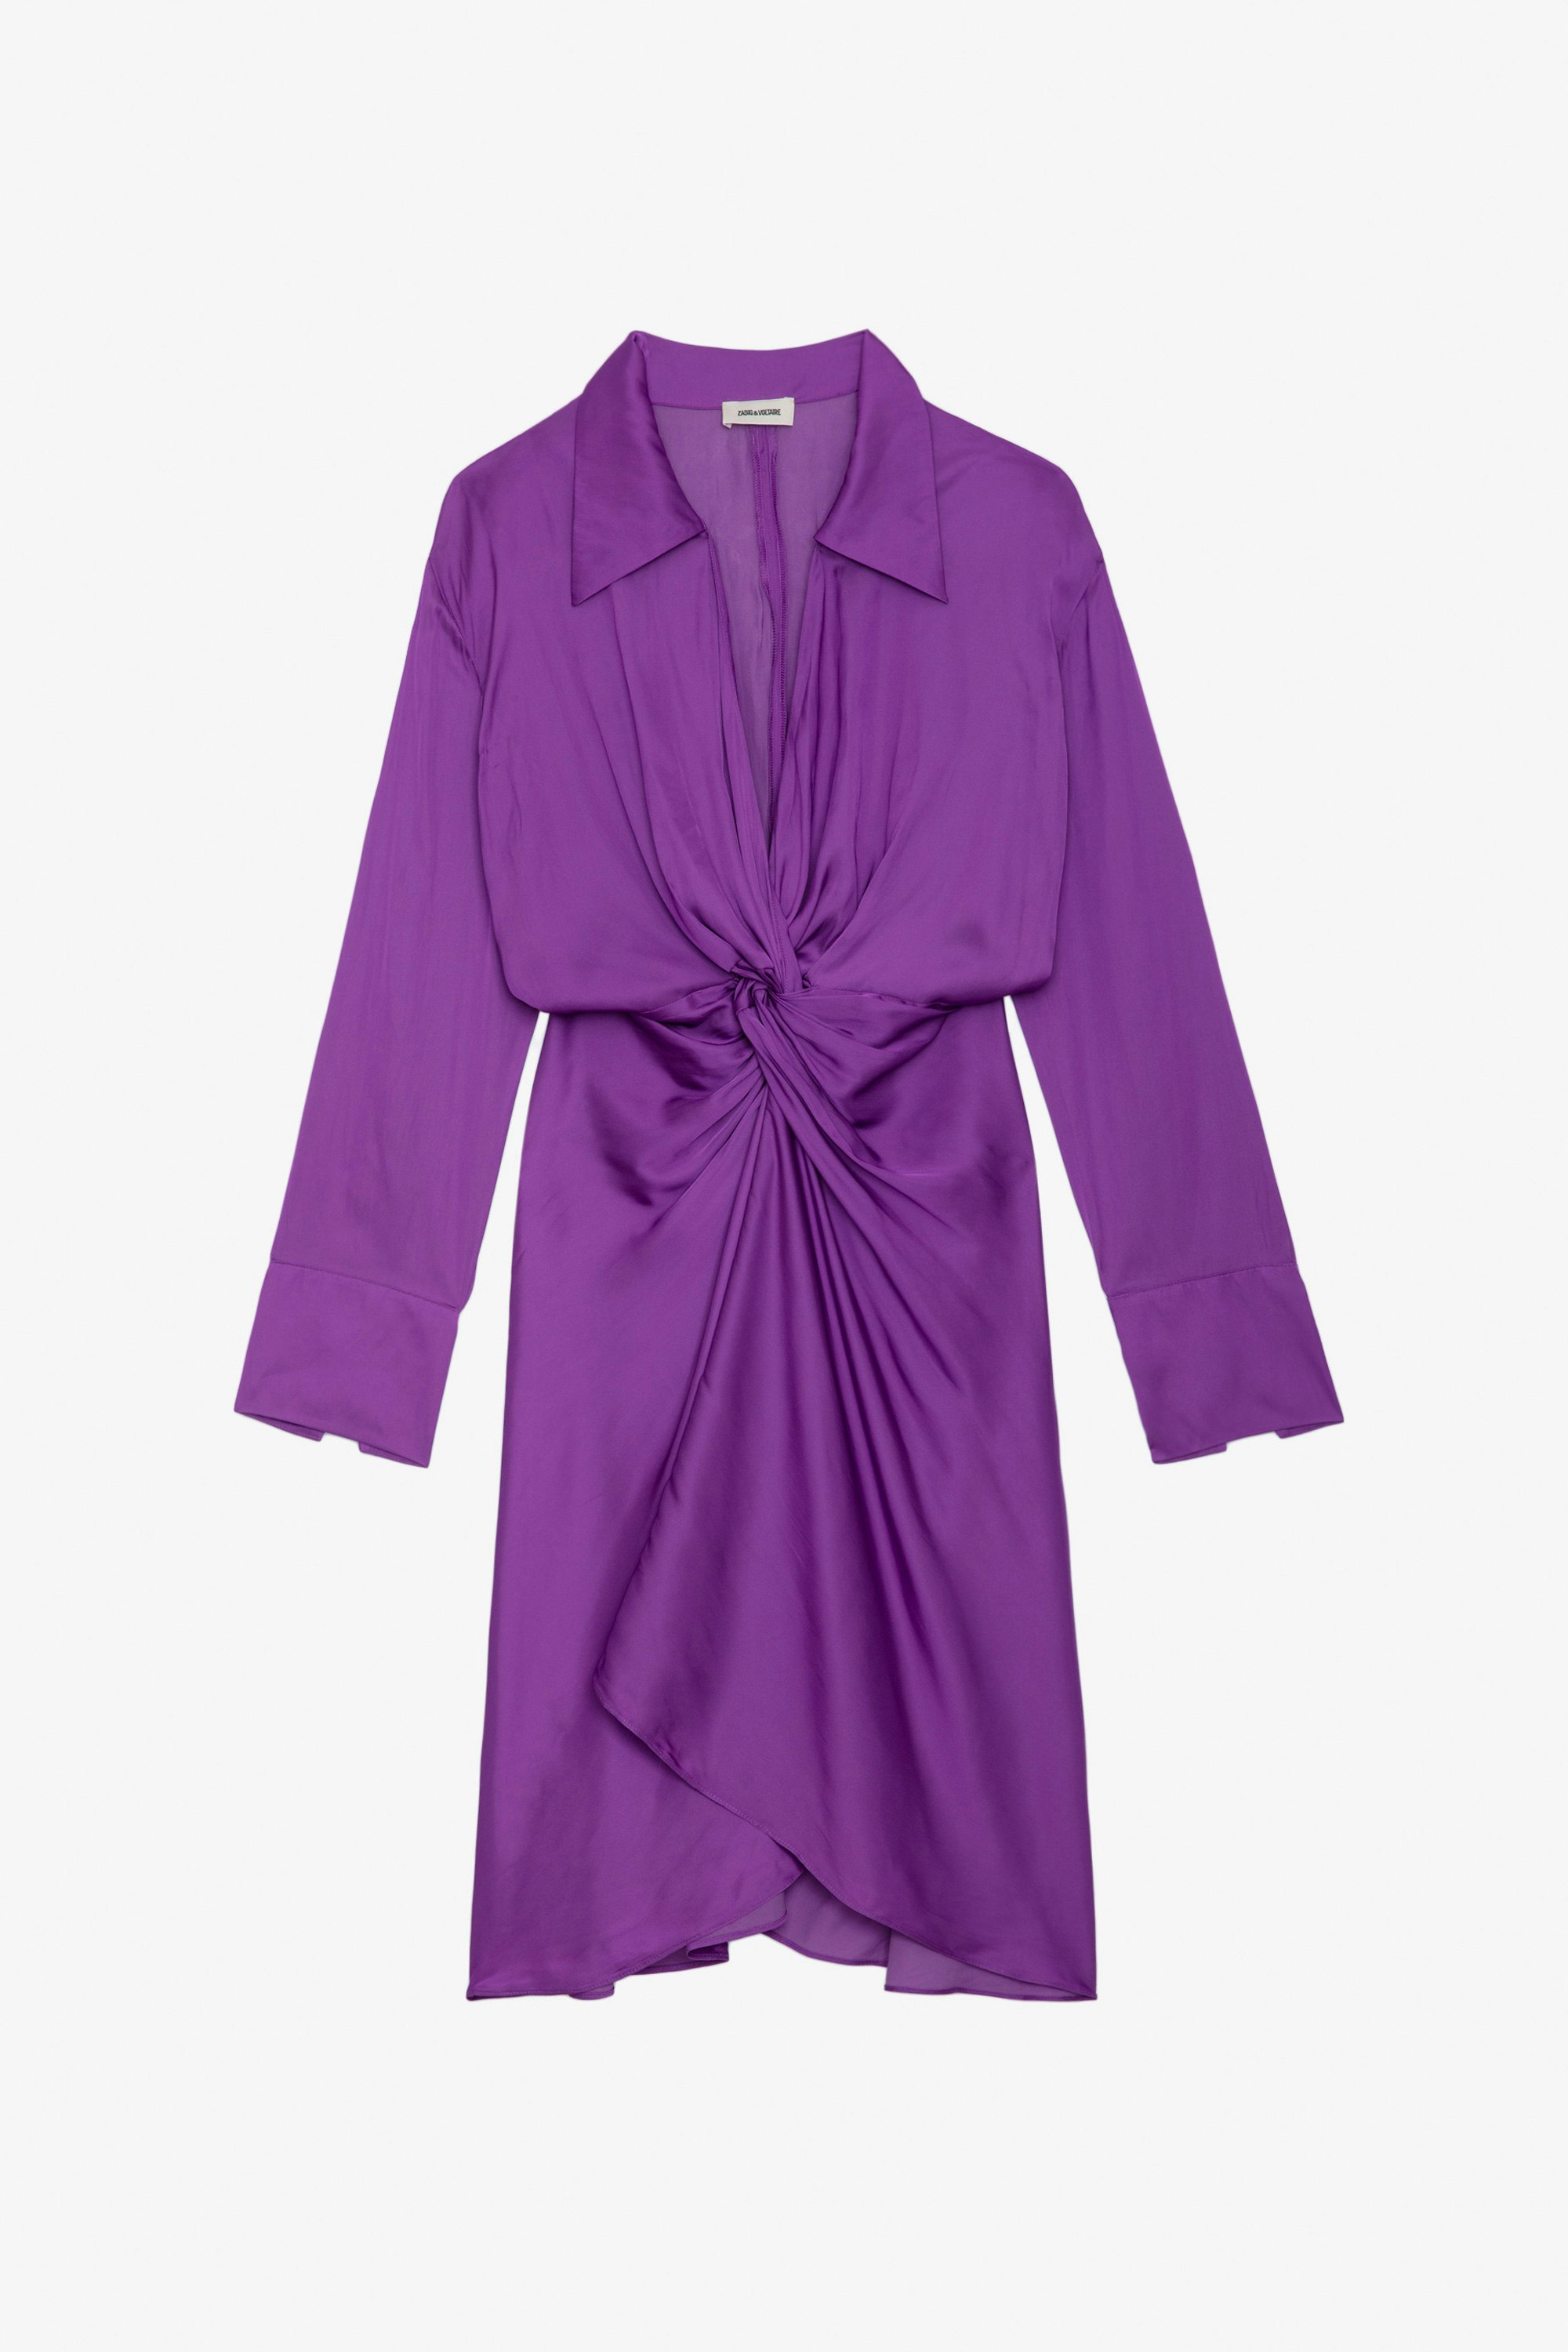 Rozo Satin Dress - Purple satin midi dress with long sleeves and draping at the waist.